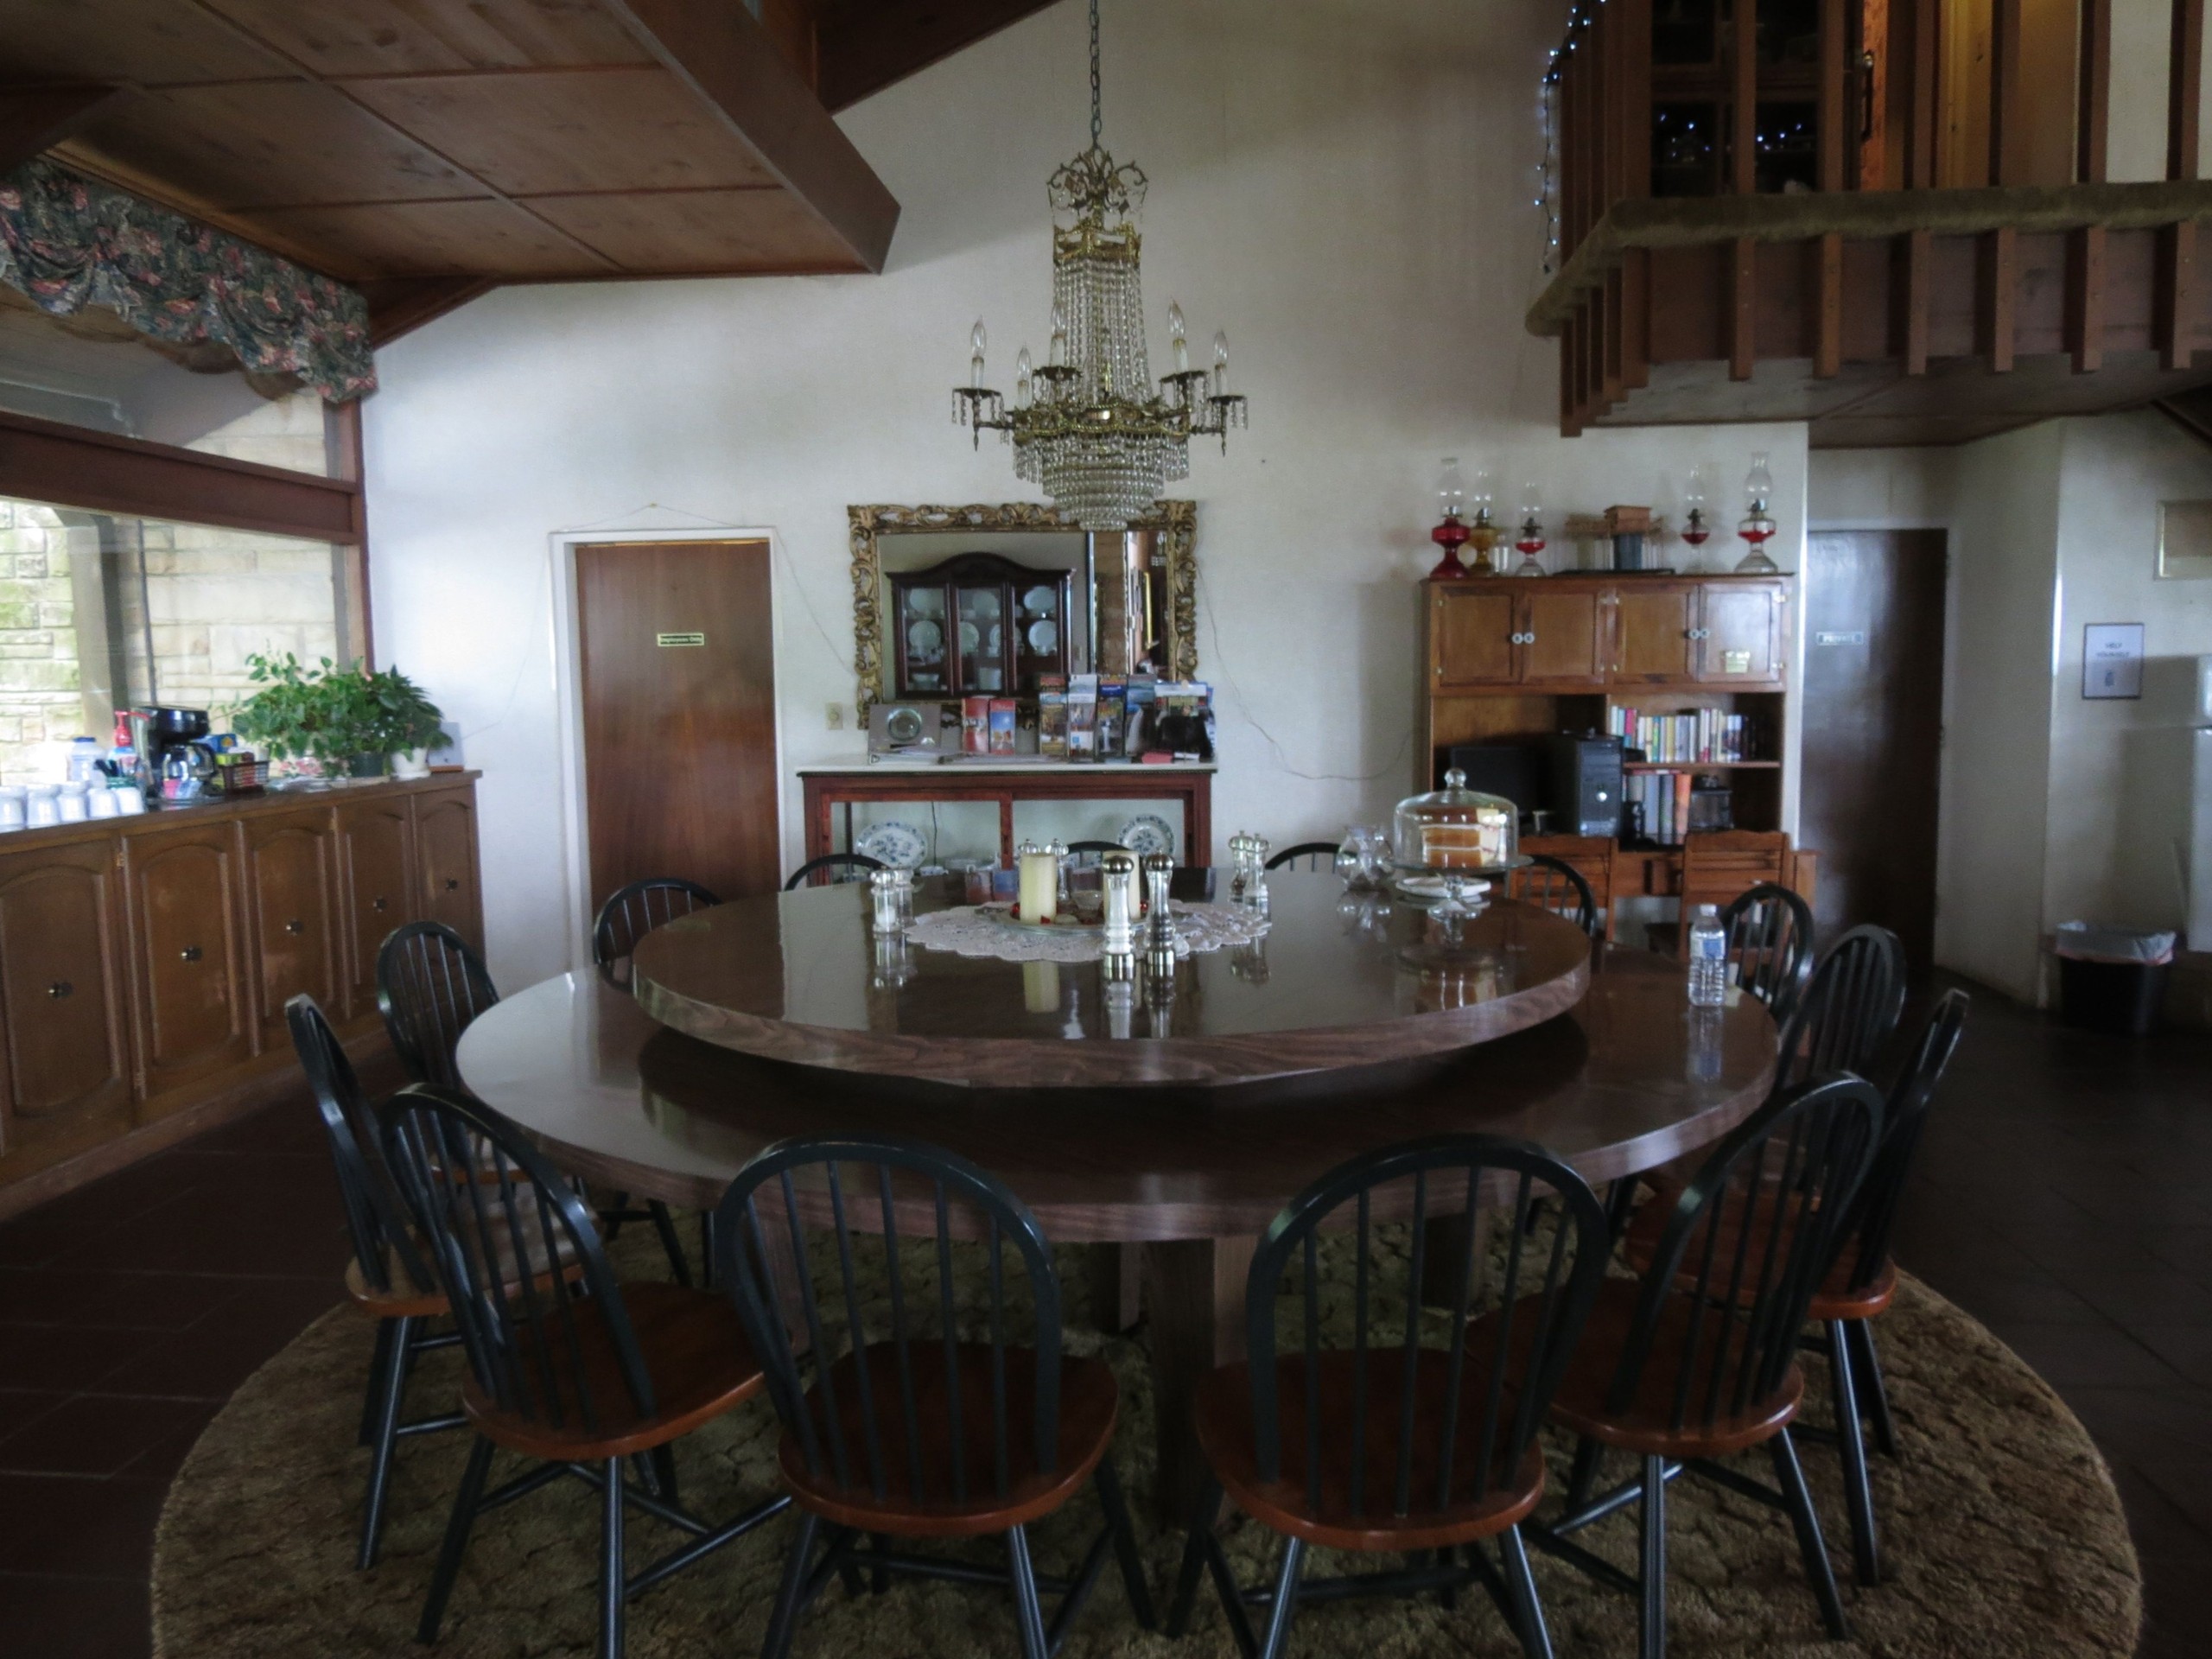 Our large table with its lazy susan makes an ideal